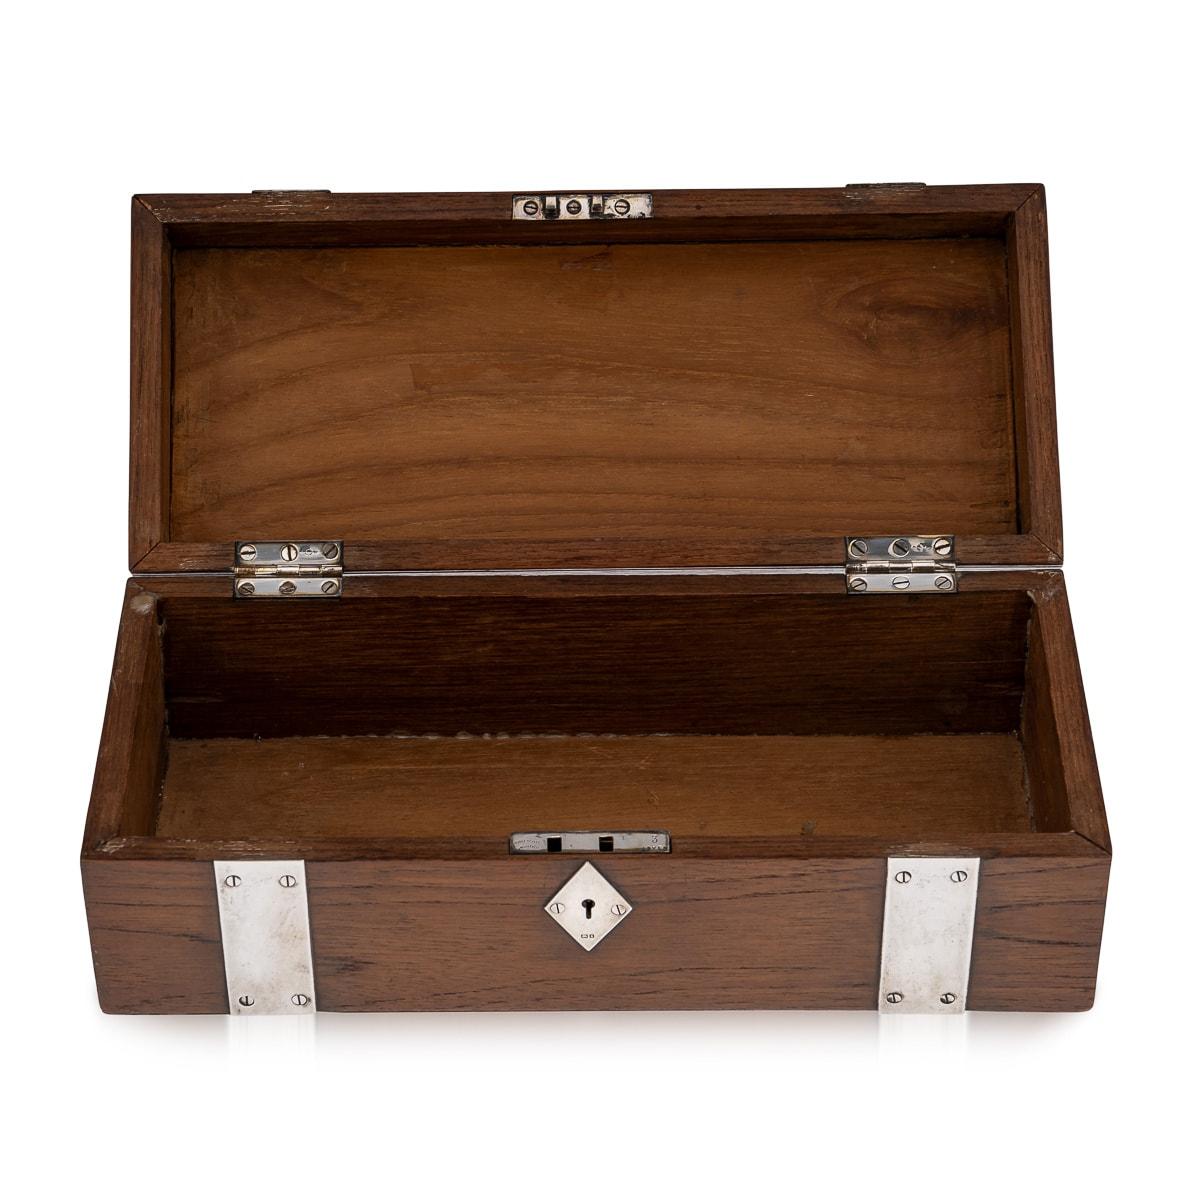 20th Century British Solid Silver & Wood 'H.M.S Majestic' Box, c.1905 In Good Condition For Sale In Royal Tunbridge Wells, Kent